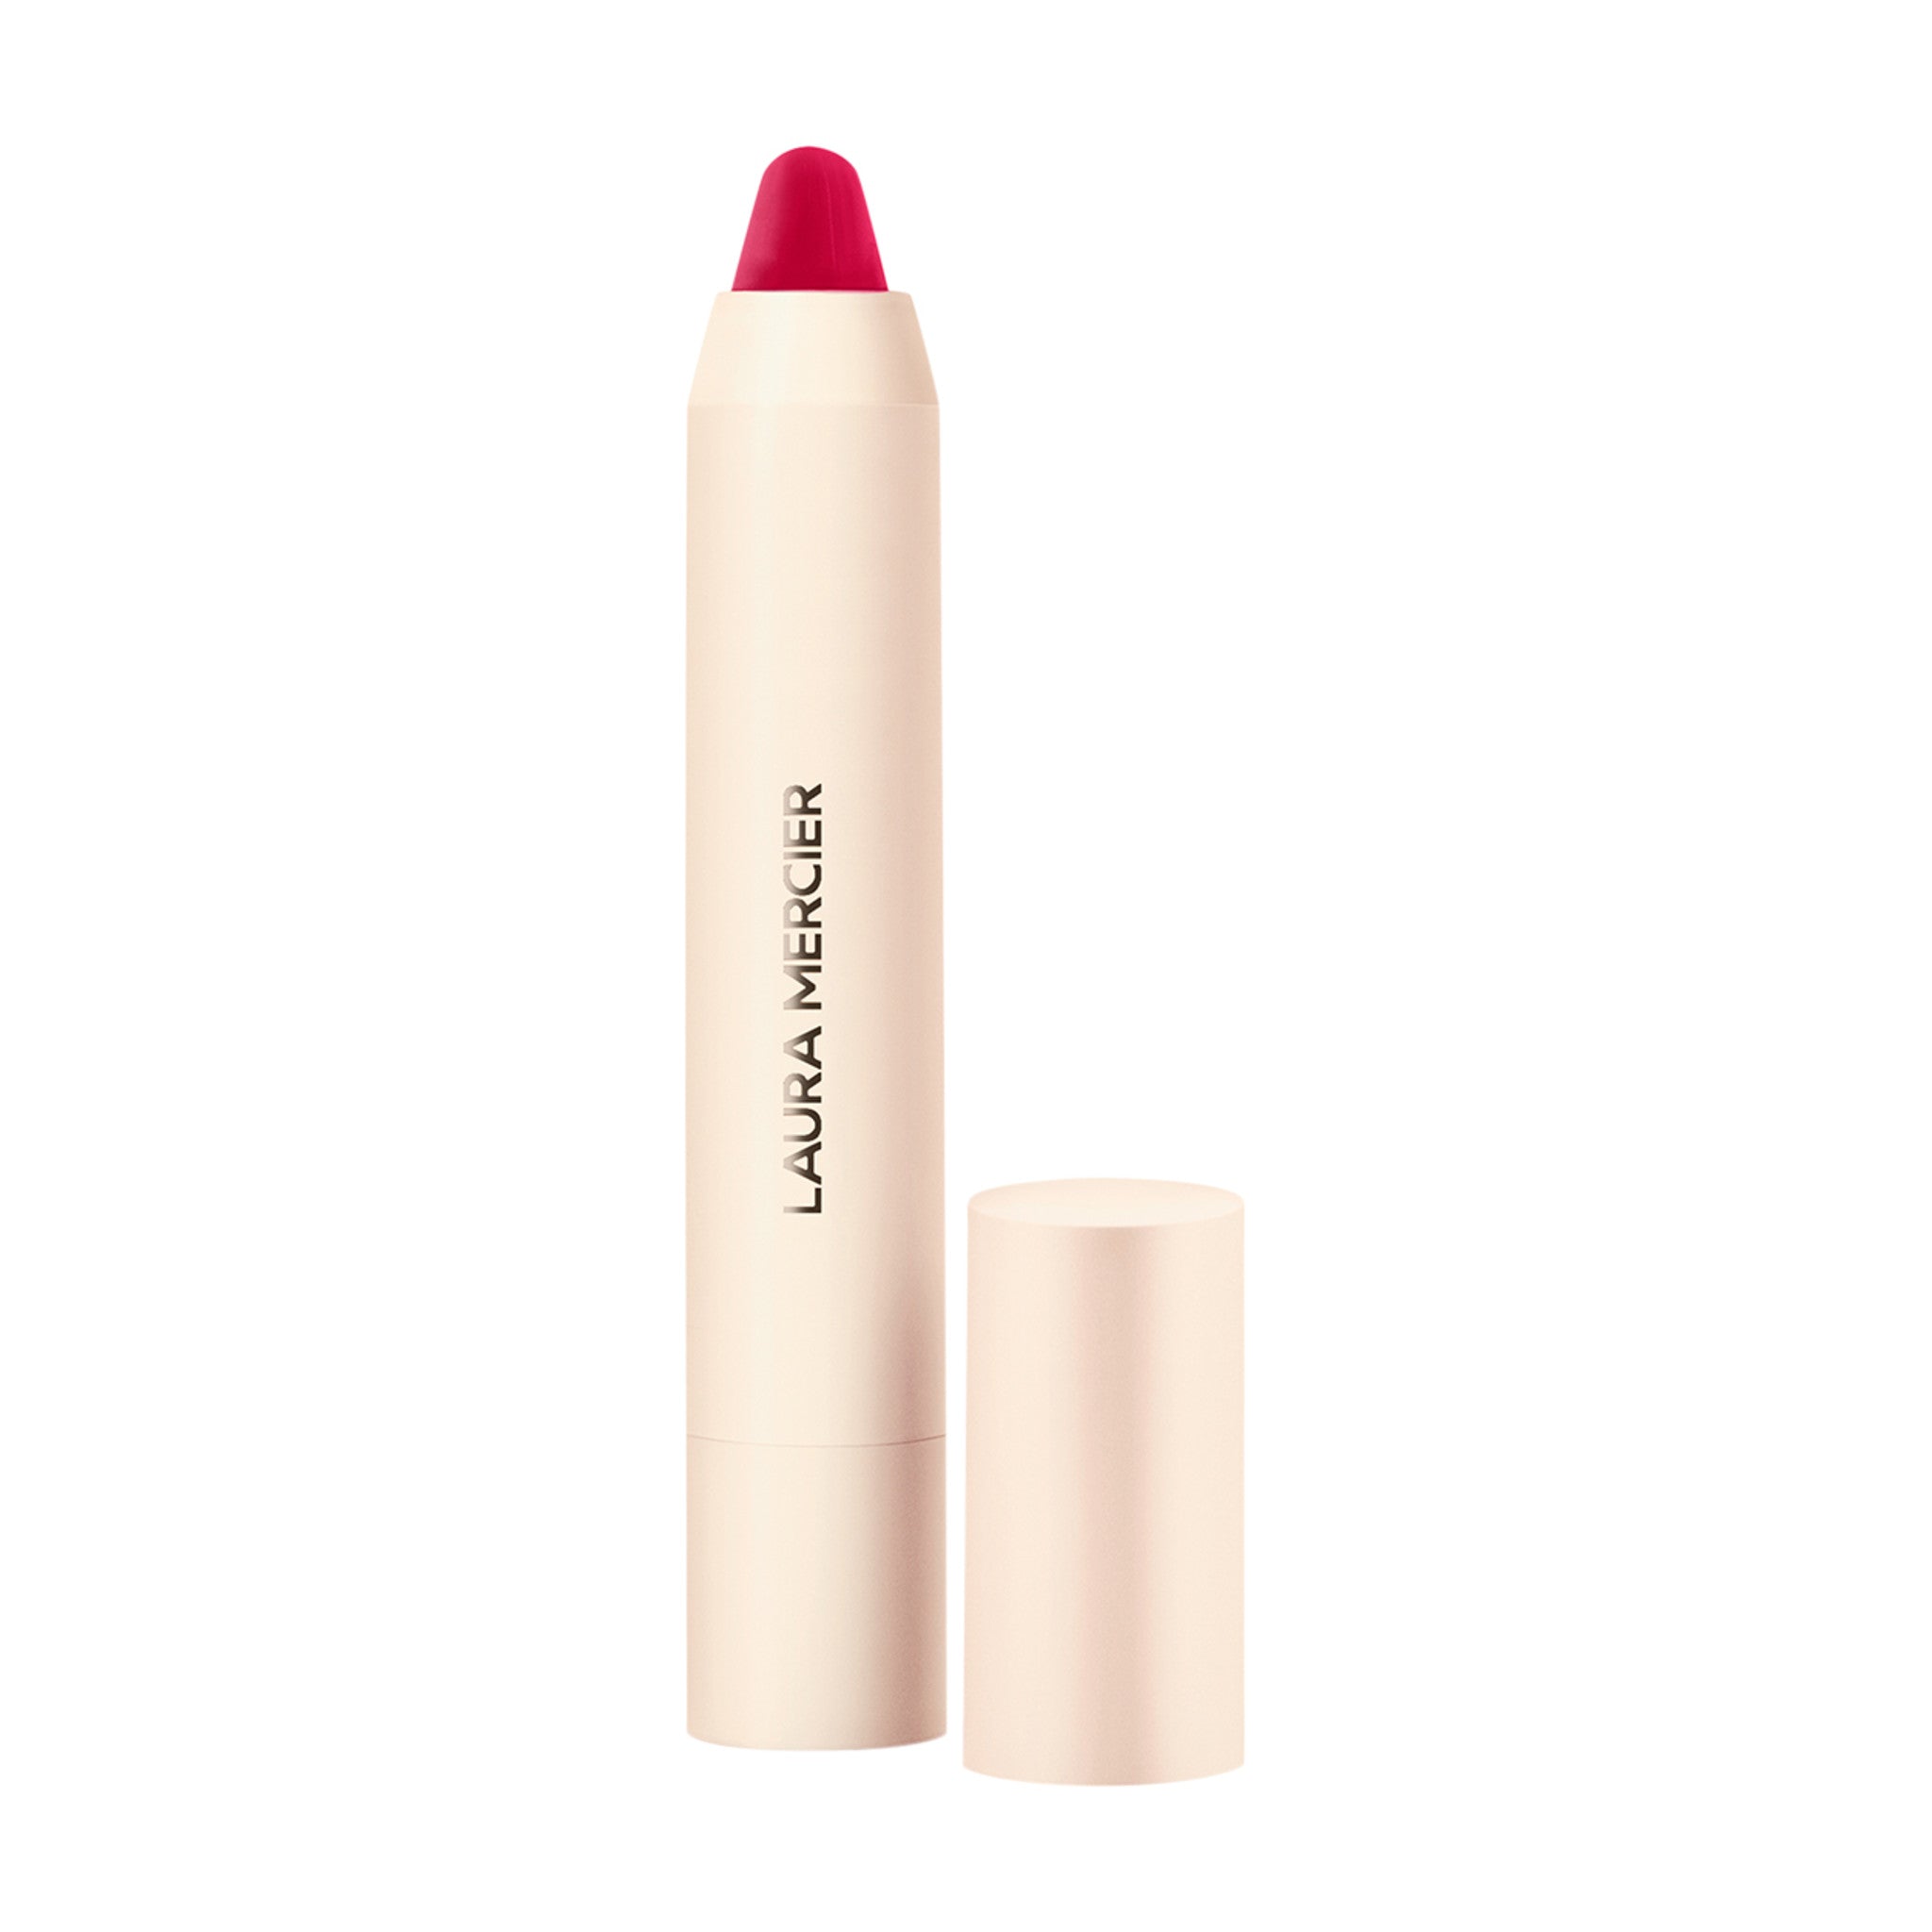 Laura Mercier Petal Soft Lip Color/Shade variant: Louise main image. This product is in the color pink